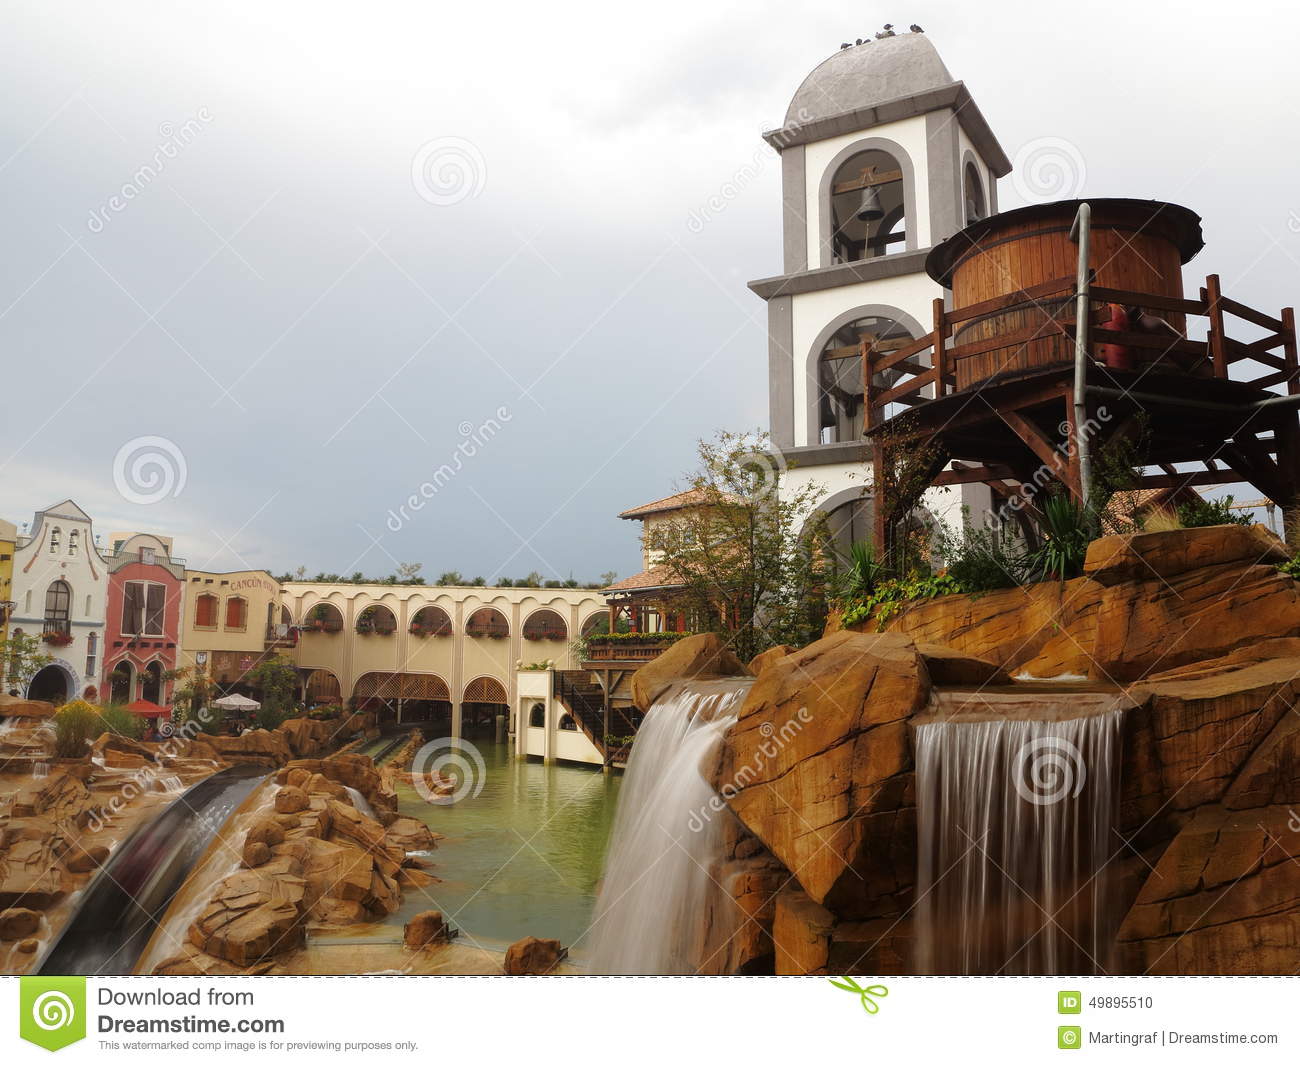 Log Flume Ride Chiapas In Mexican Themed Setting With A Water